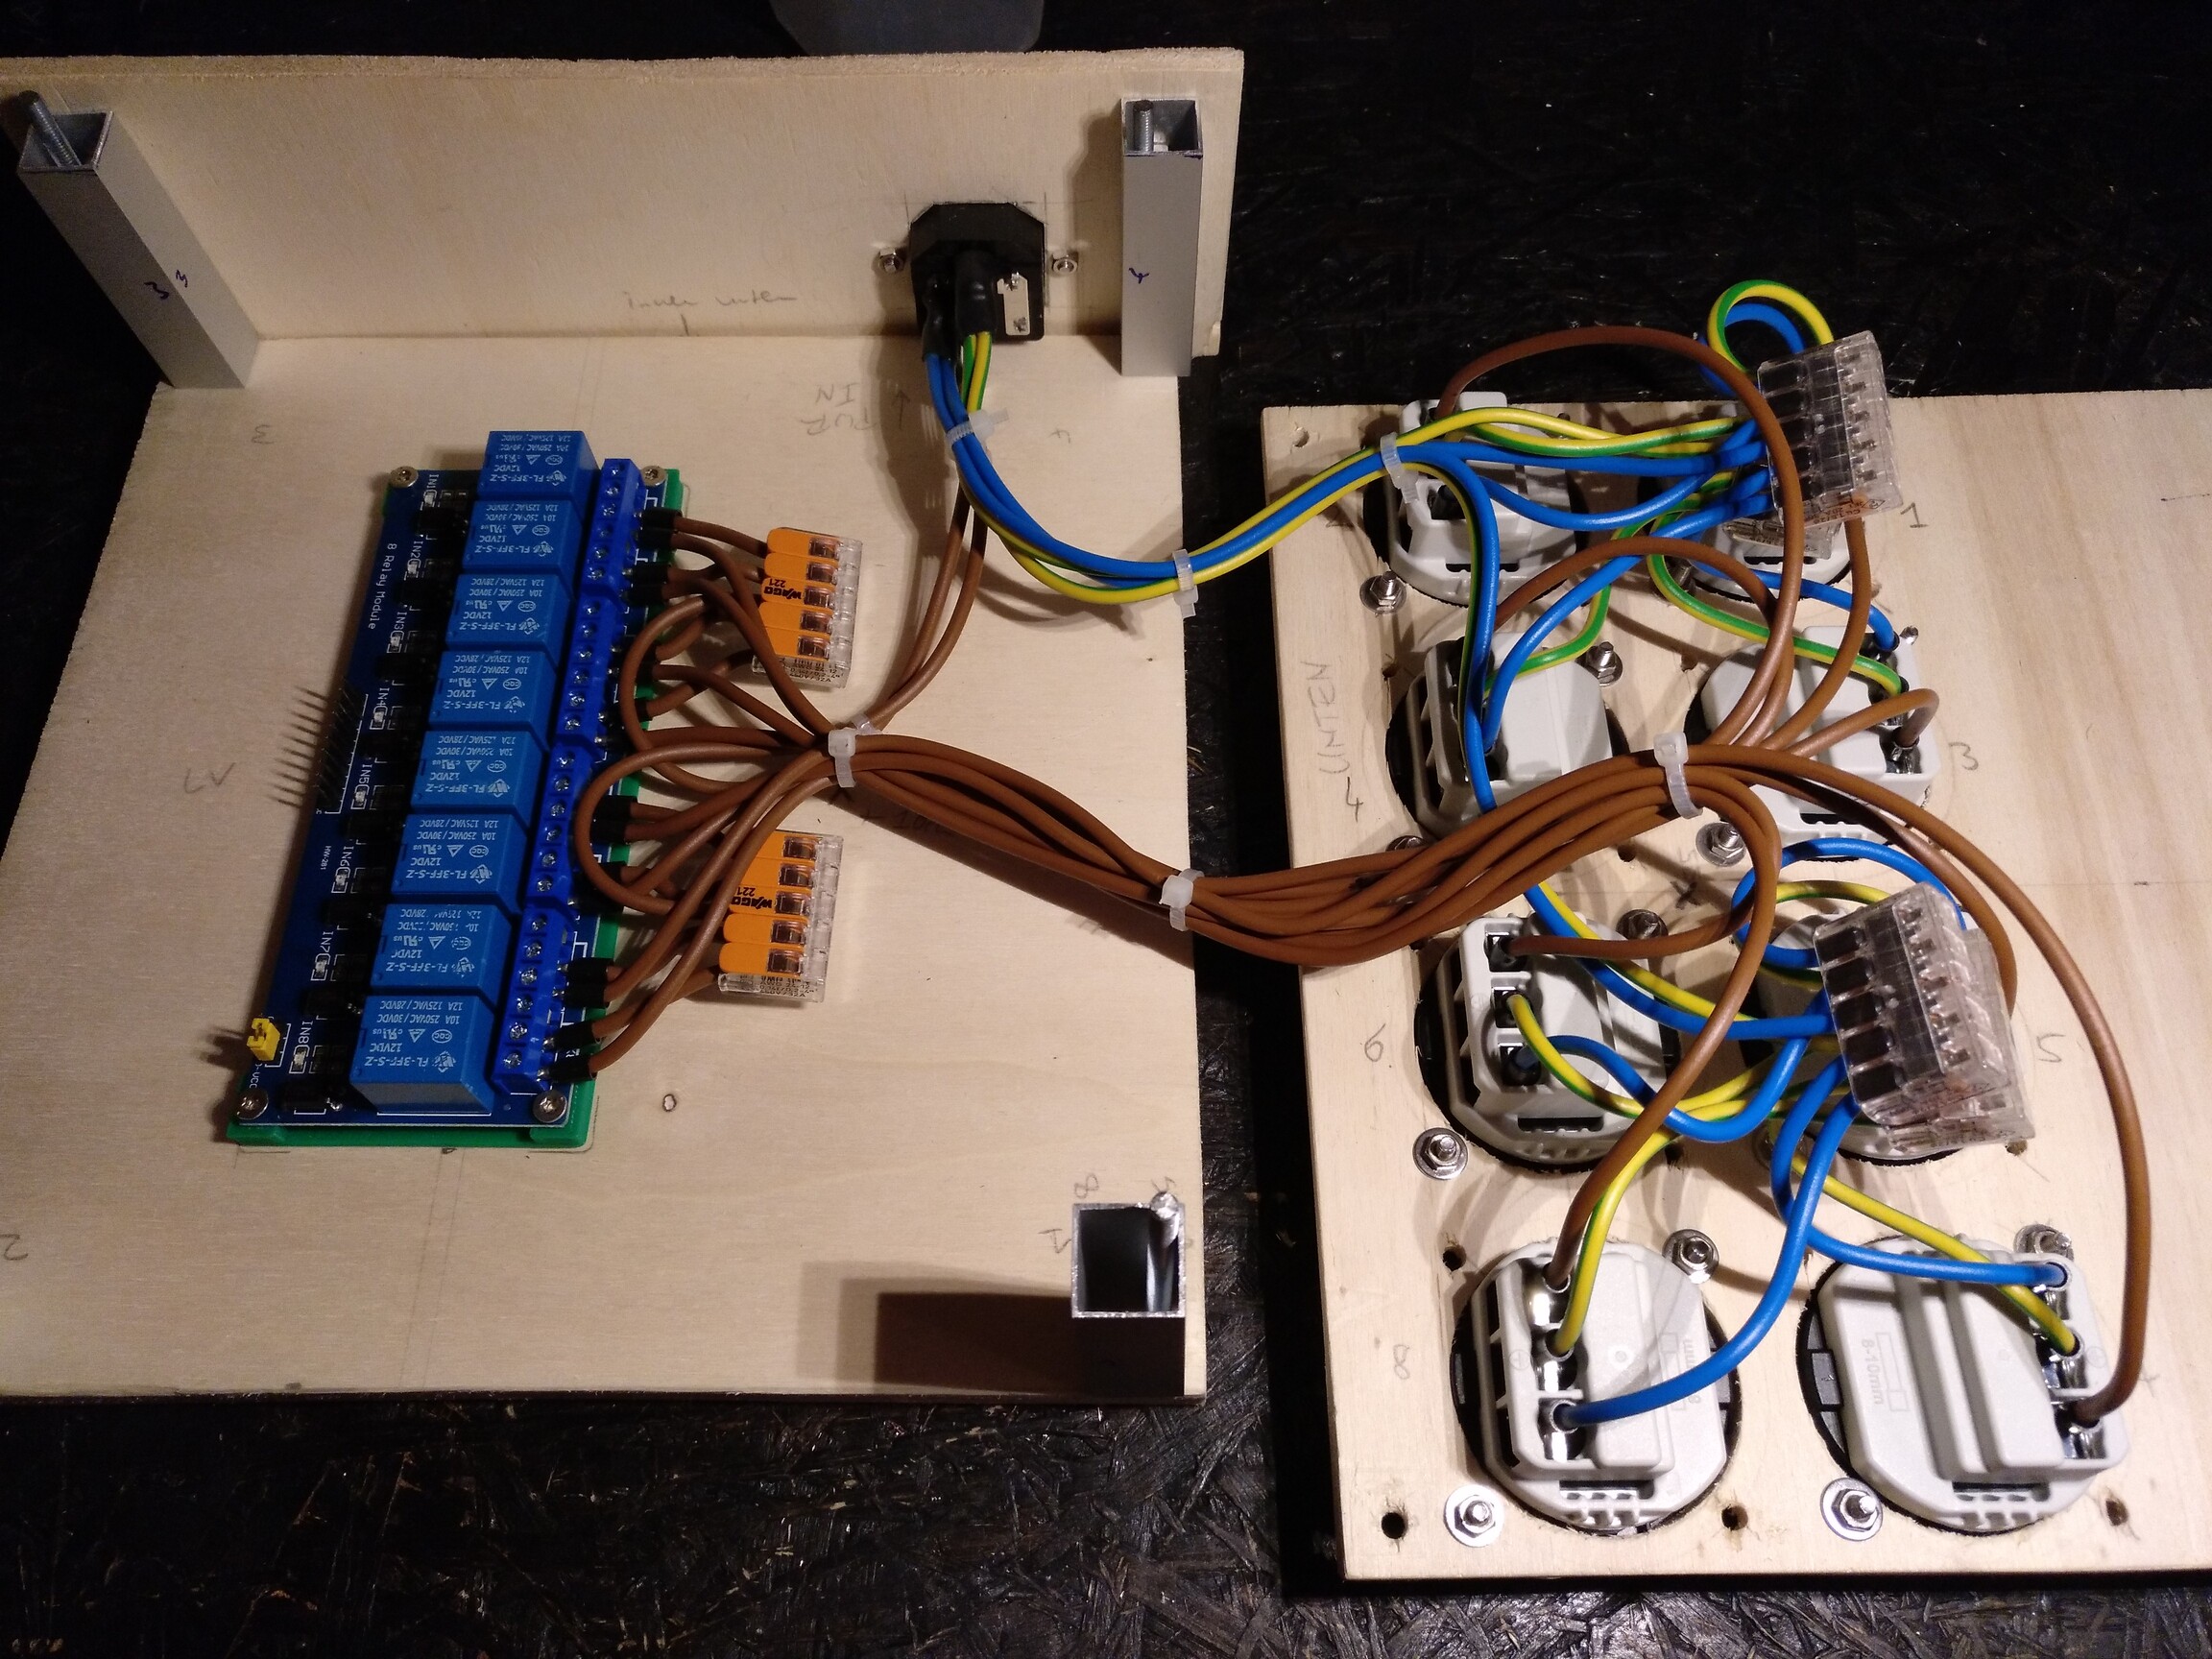 finished "high voltage" wiring